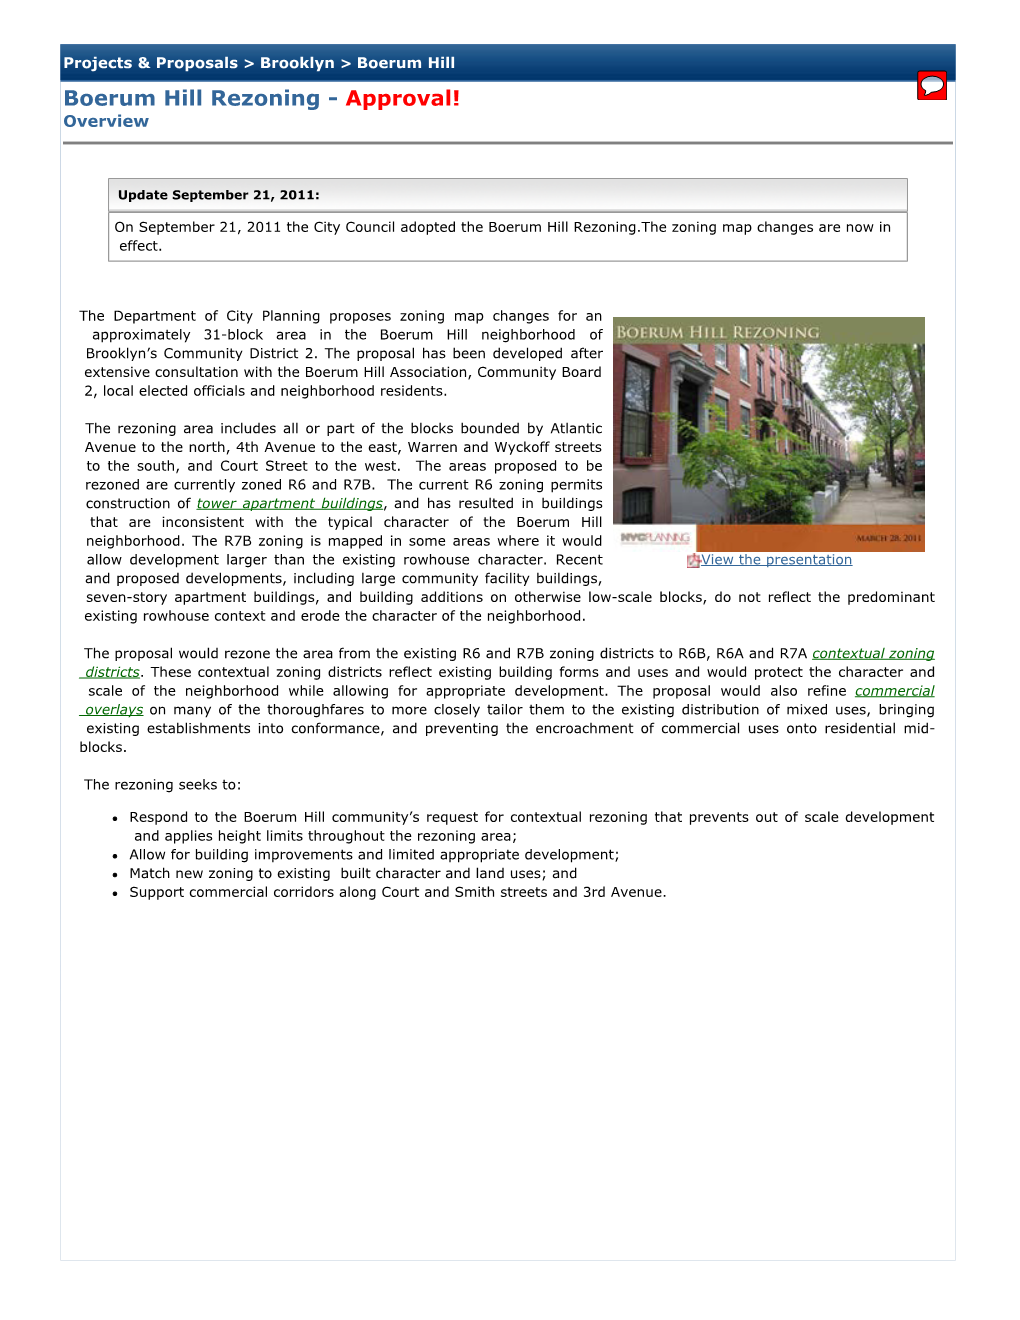 Boerum Hill Rezoning - Approval! Overview